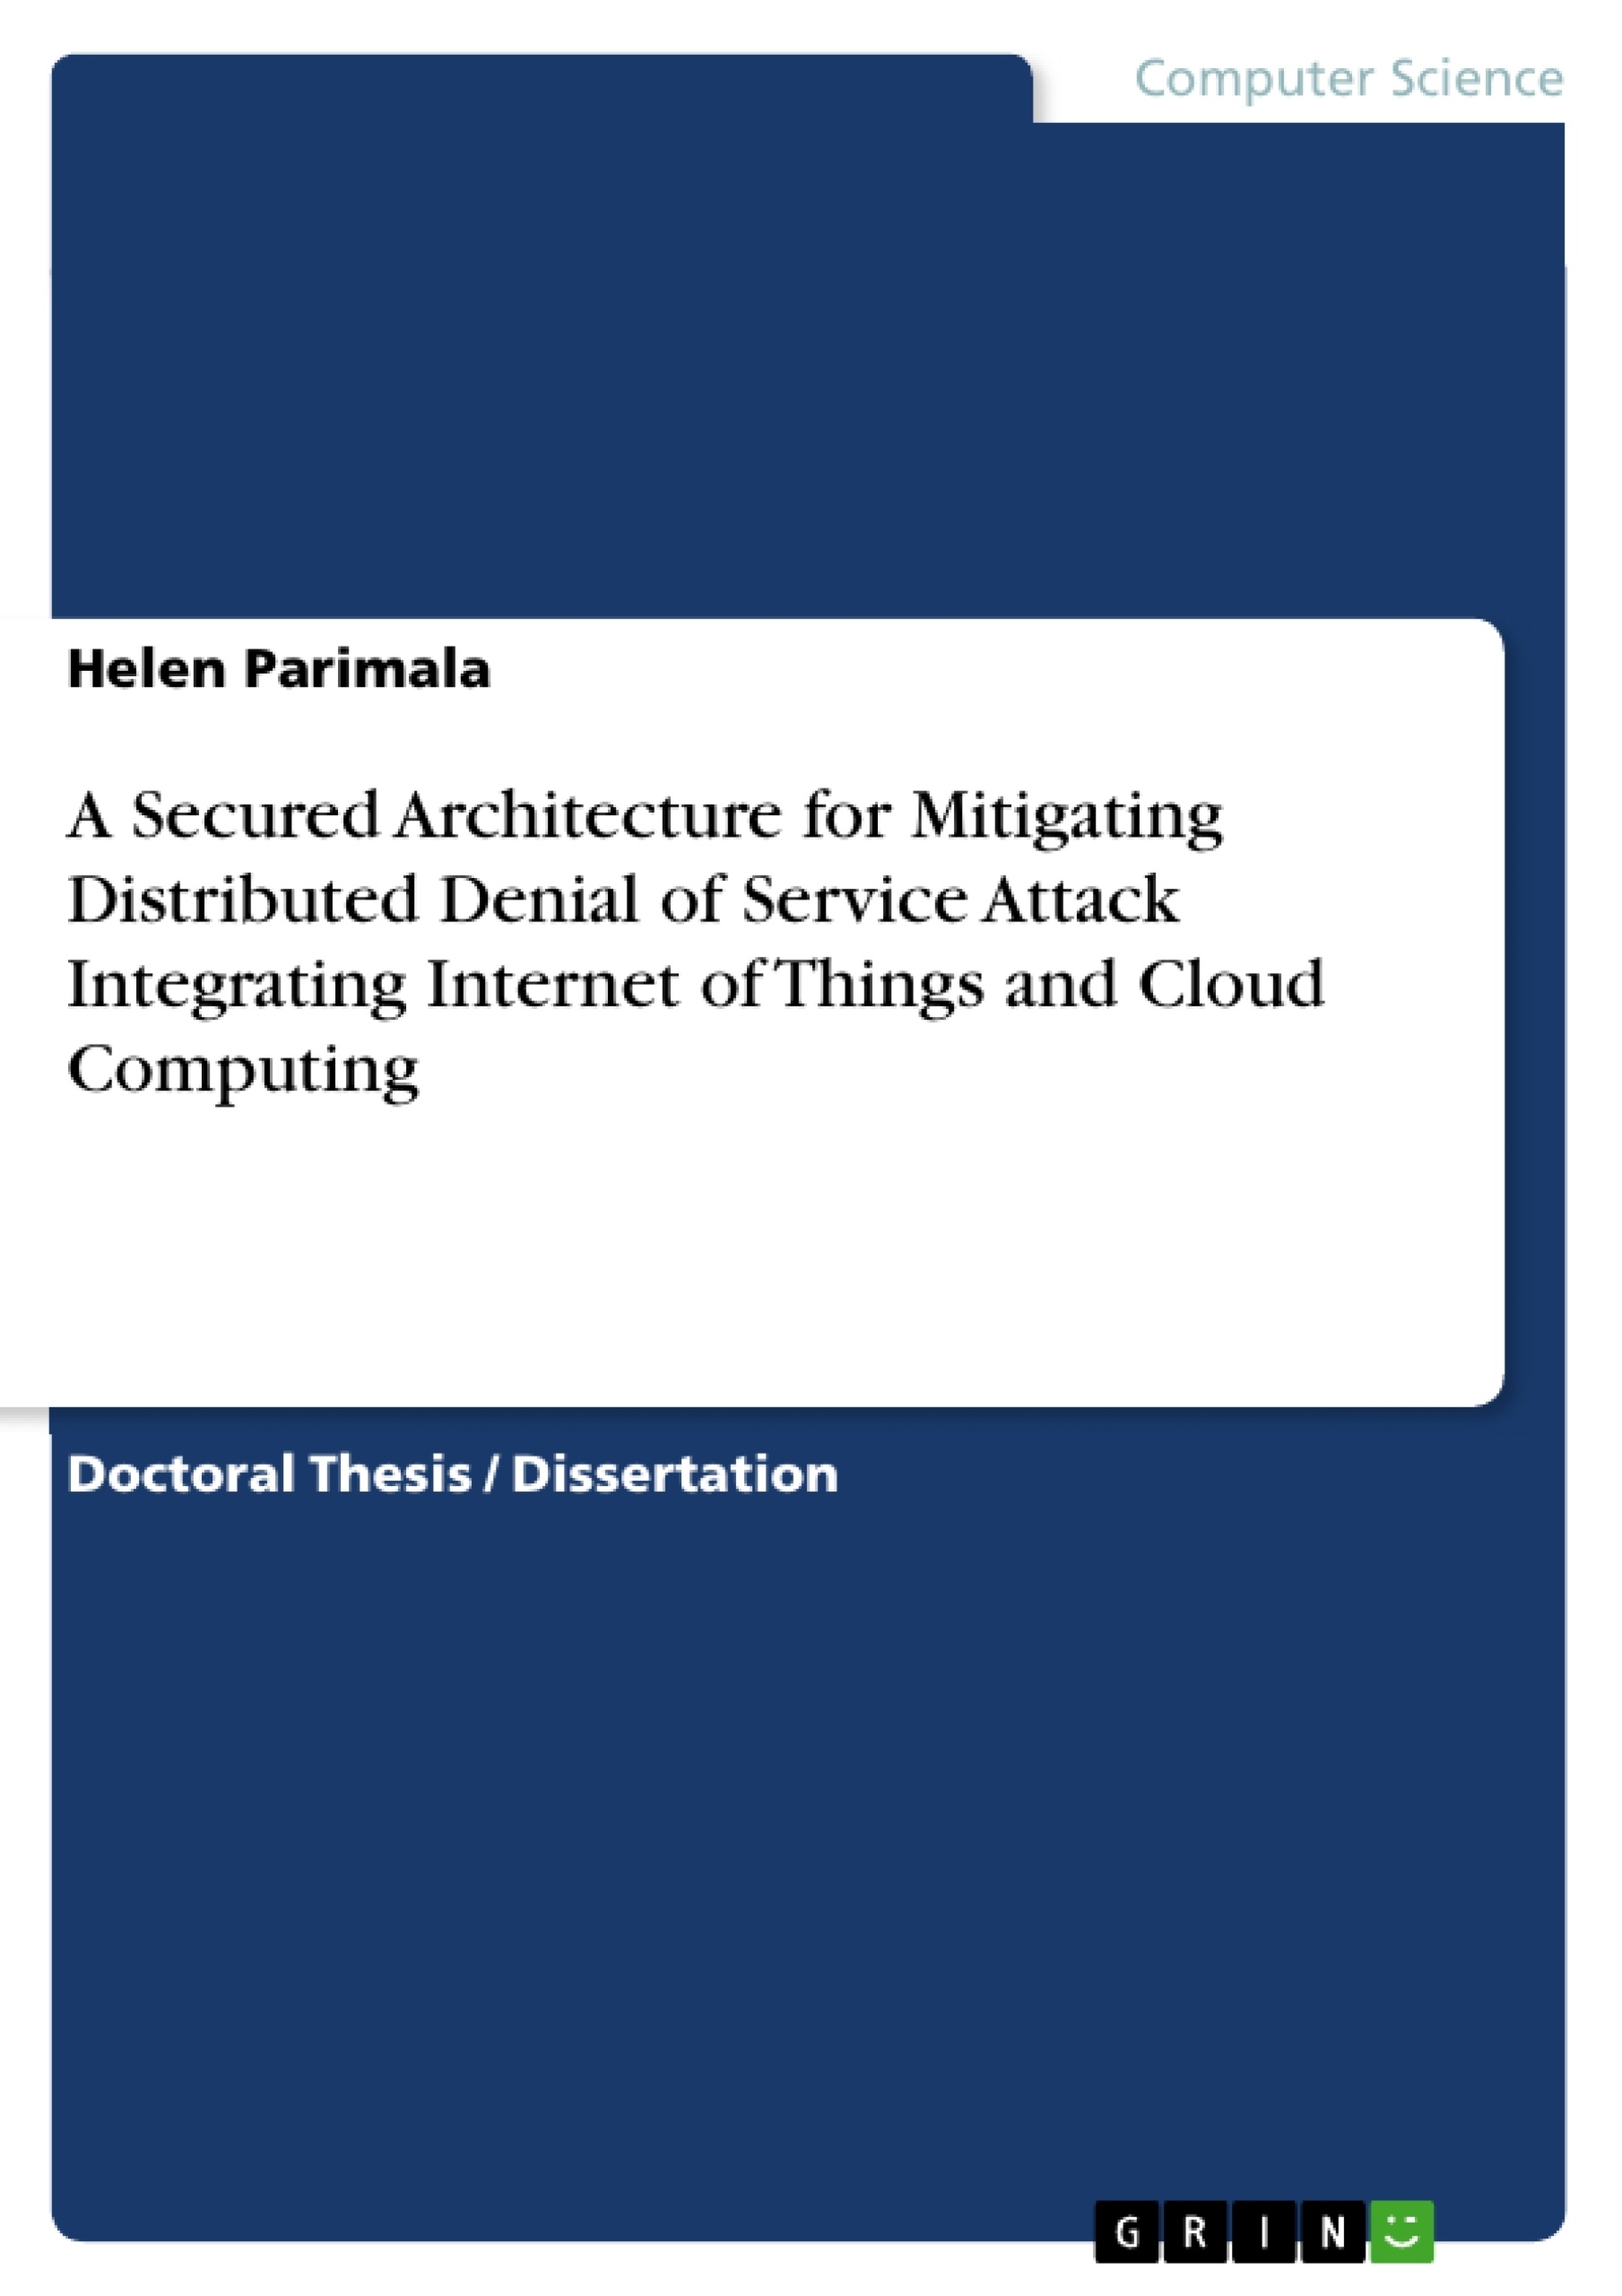 Title: A Secured Architecture for Mitigating Distributed Denial of Service Attack Integrating Internet of Things and Cloud Computing